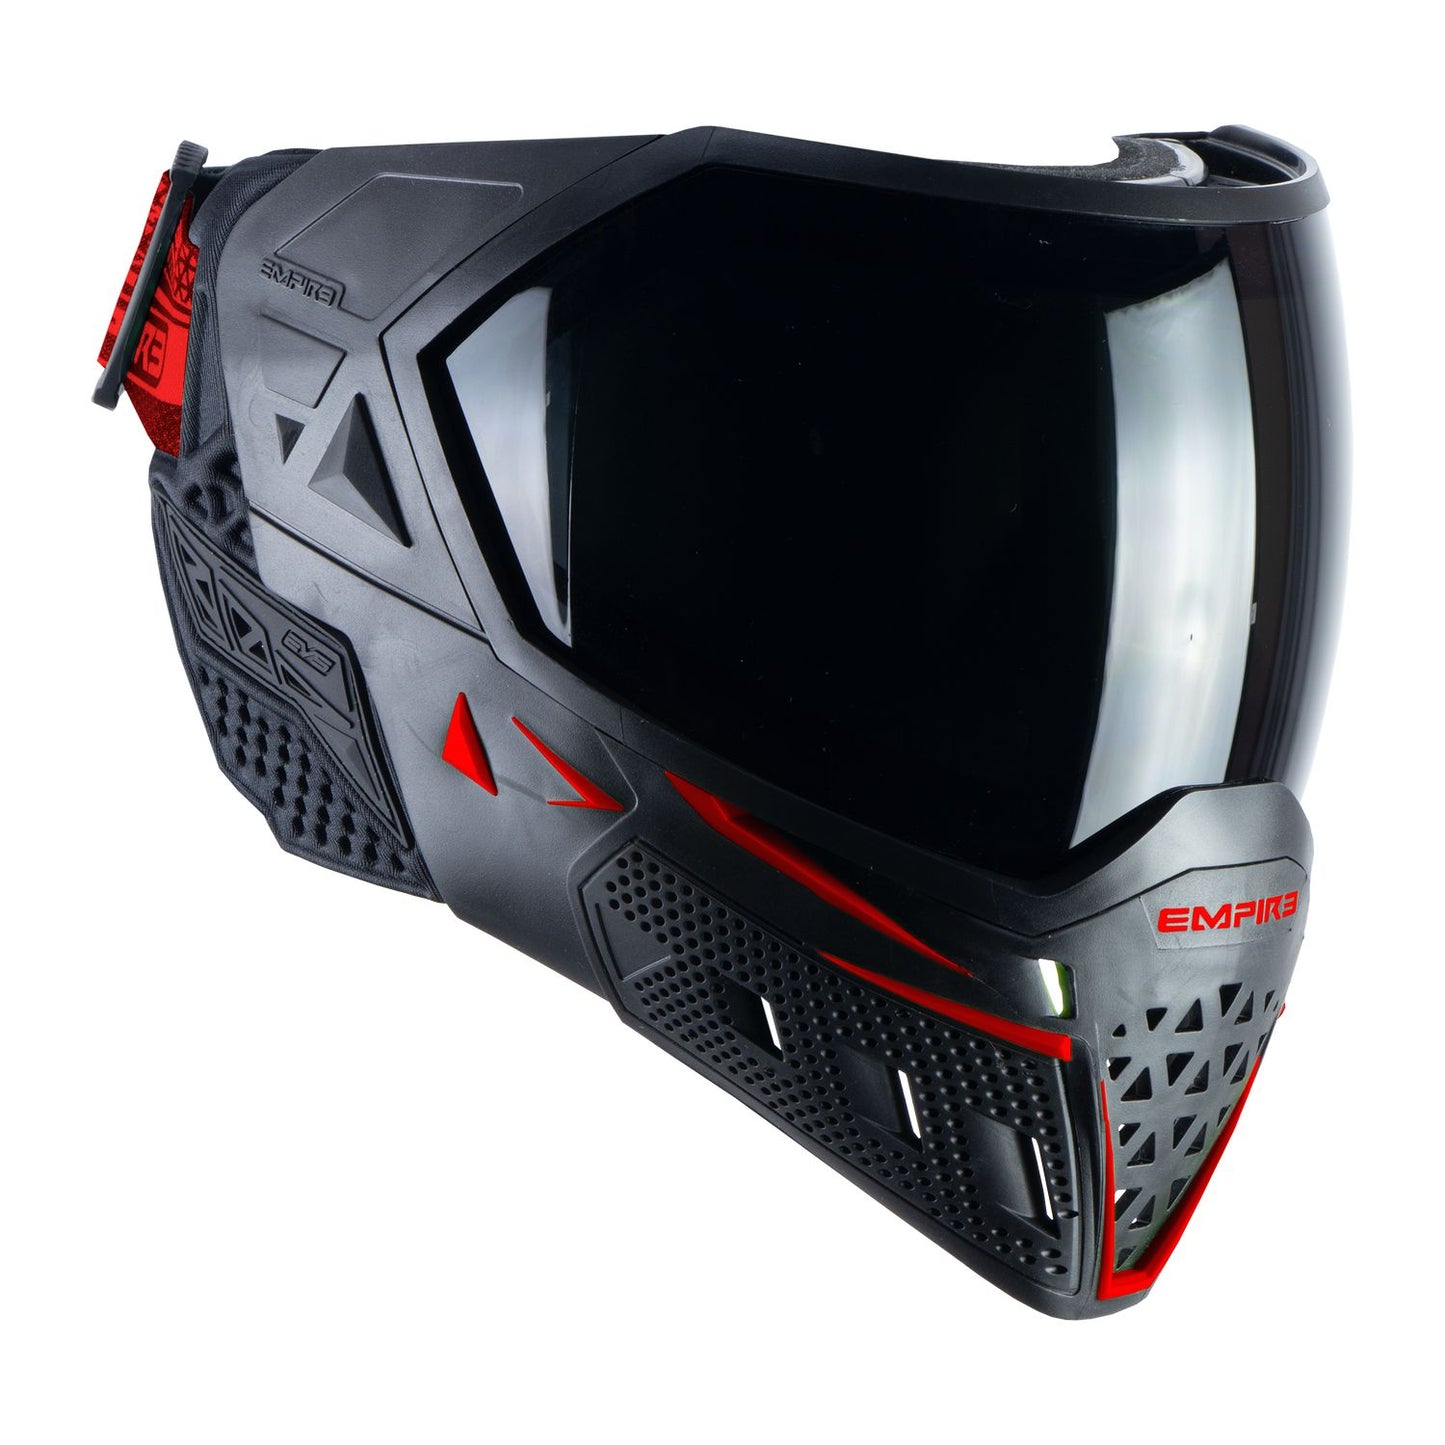 Empire EVS Enhanced Vision System Goggle - Black/Red - includes 2 lenses